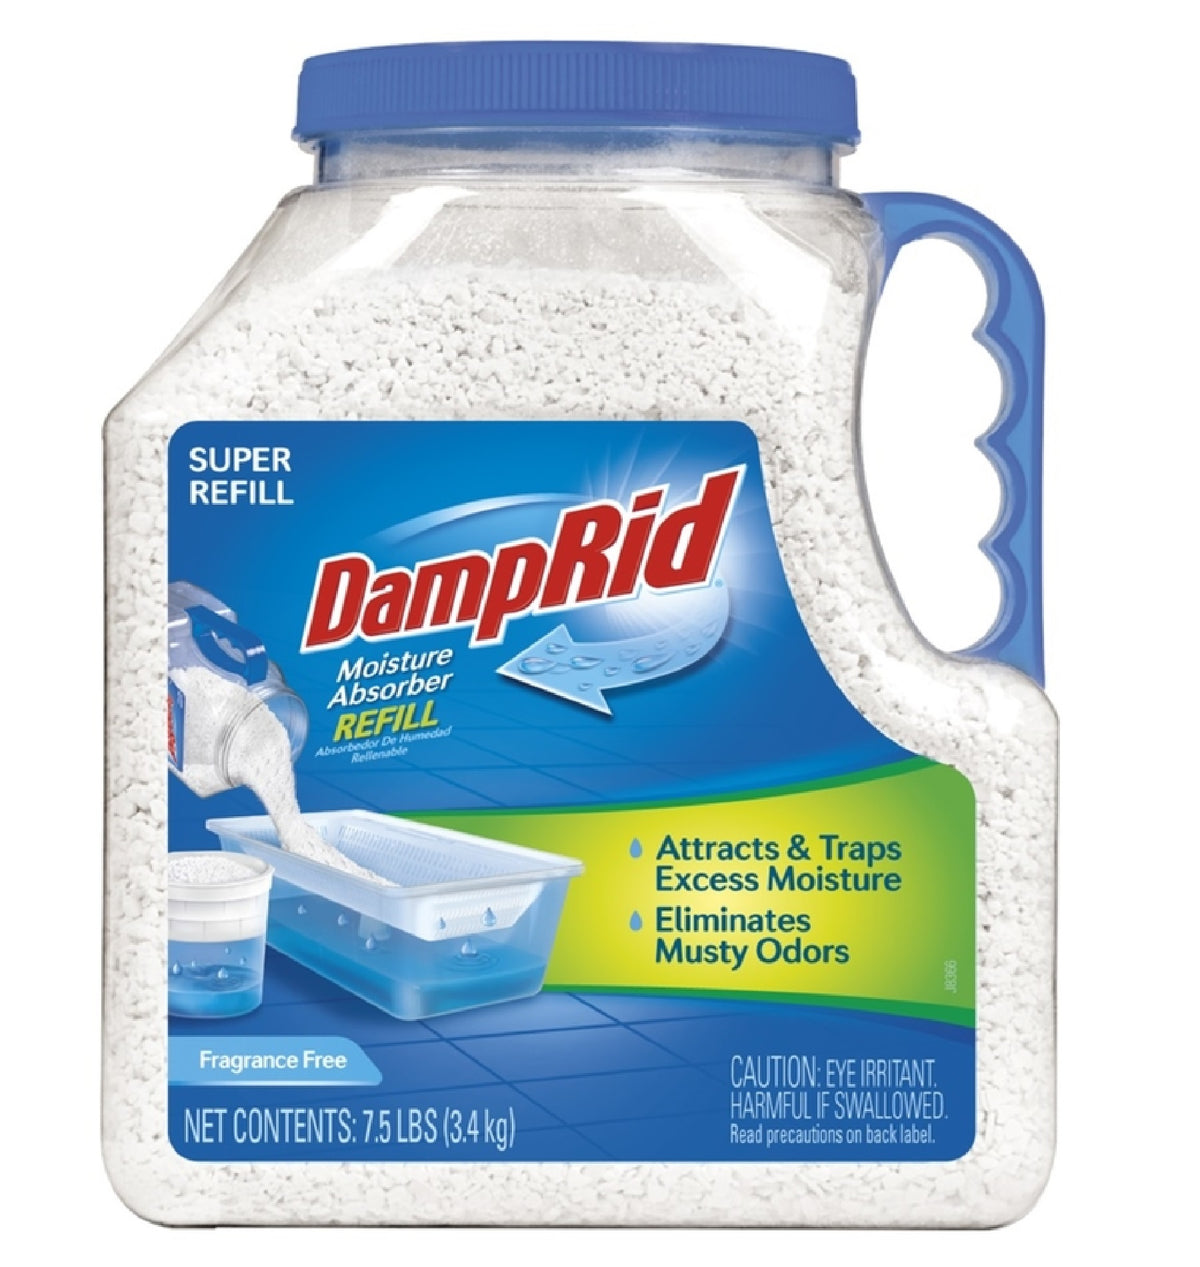 Buy damprid fg37 - Online store for cleaning supplies, moisture control in USA, on sale, low price, discount deals, coupon code